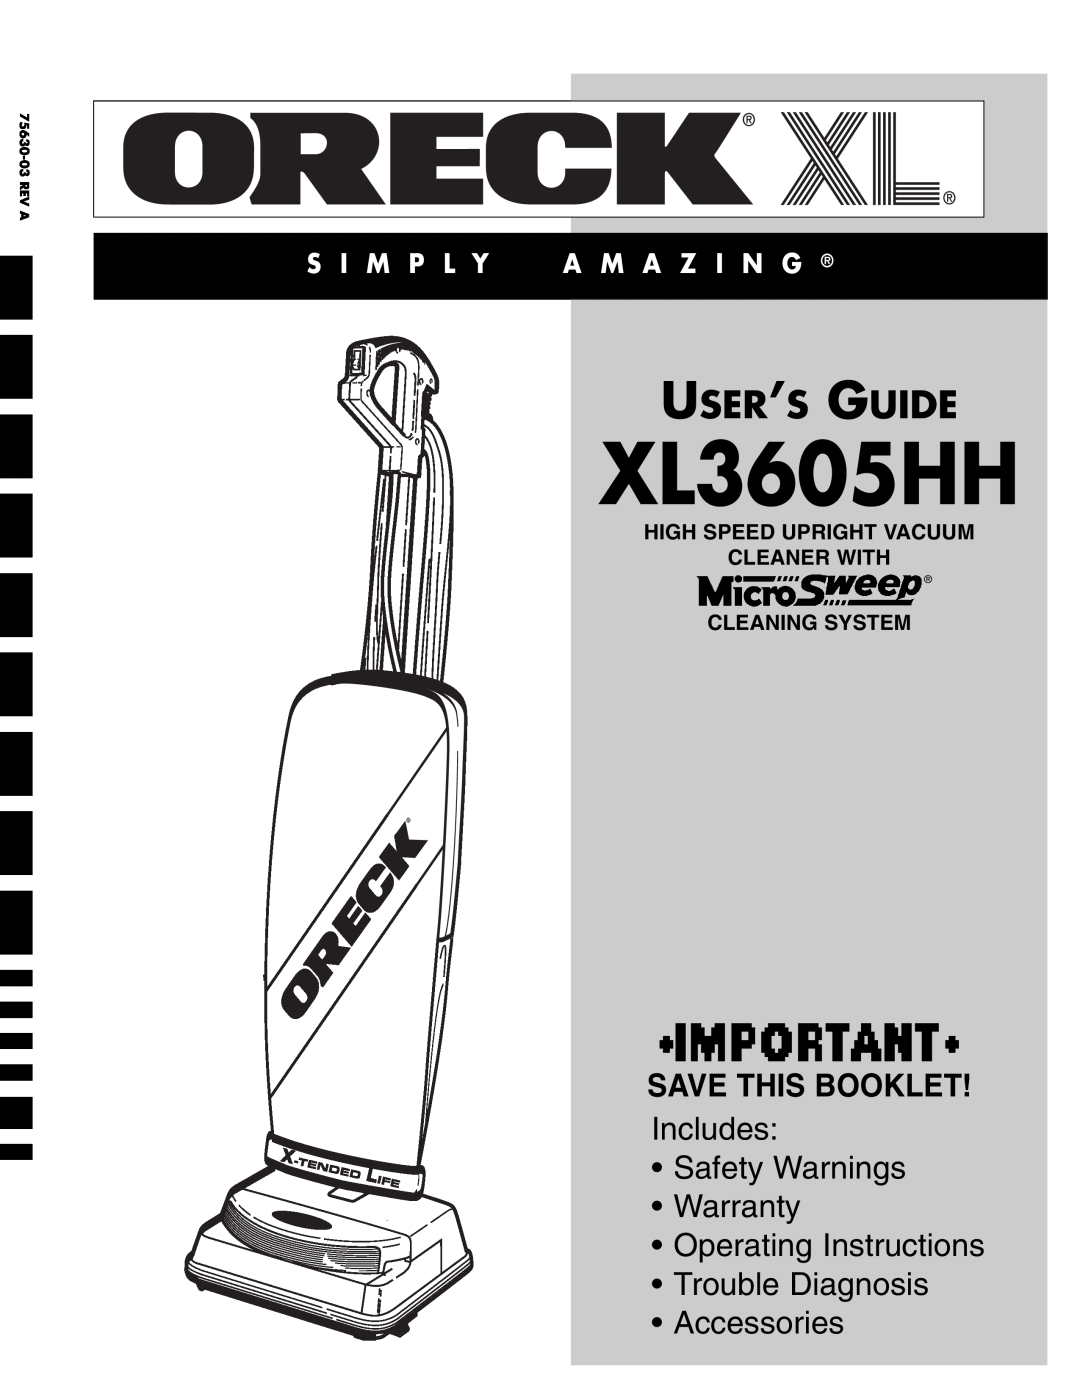 Oreck XL3605HH warranty Save This Booklet, High Speed Upright Vacuum Cleaner With, Cleaning System, User’S Guide 